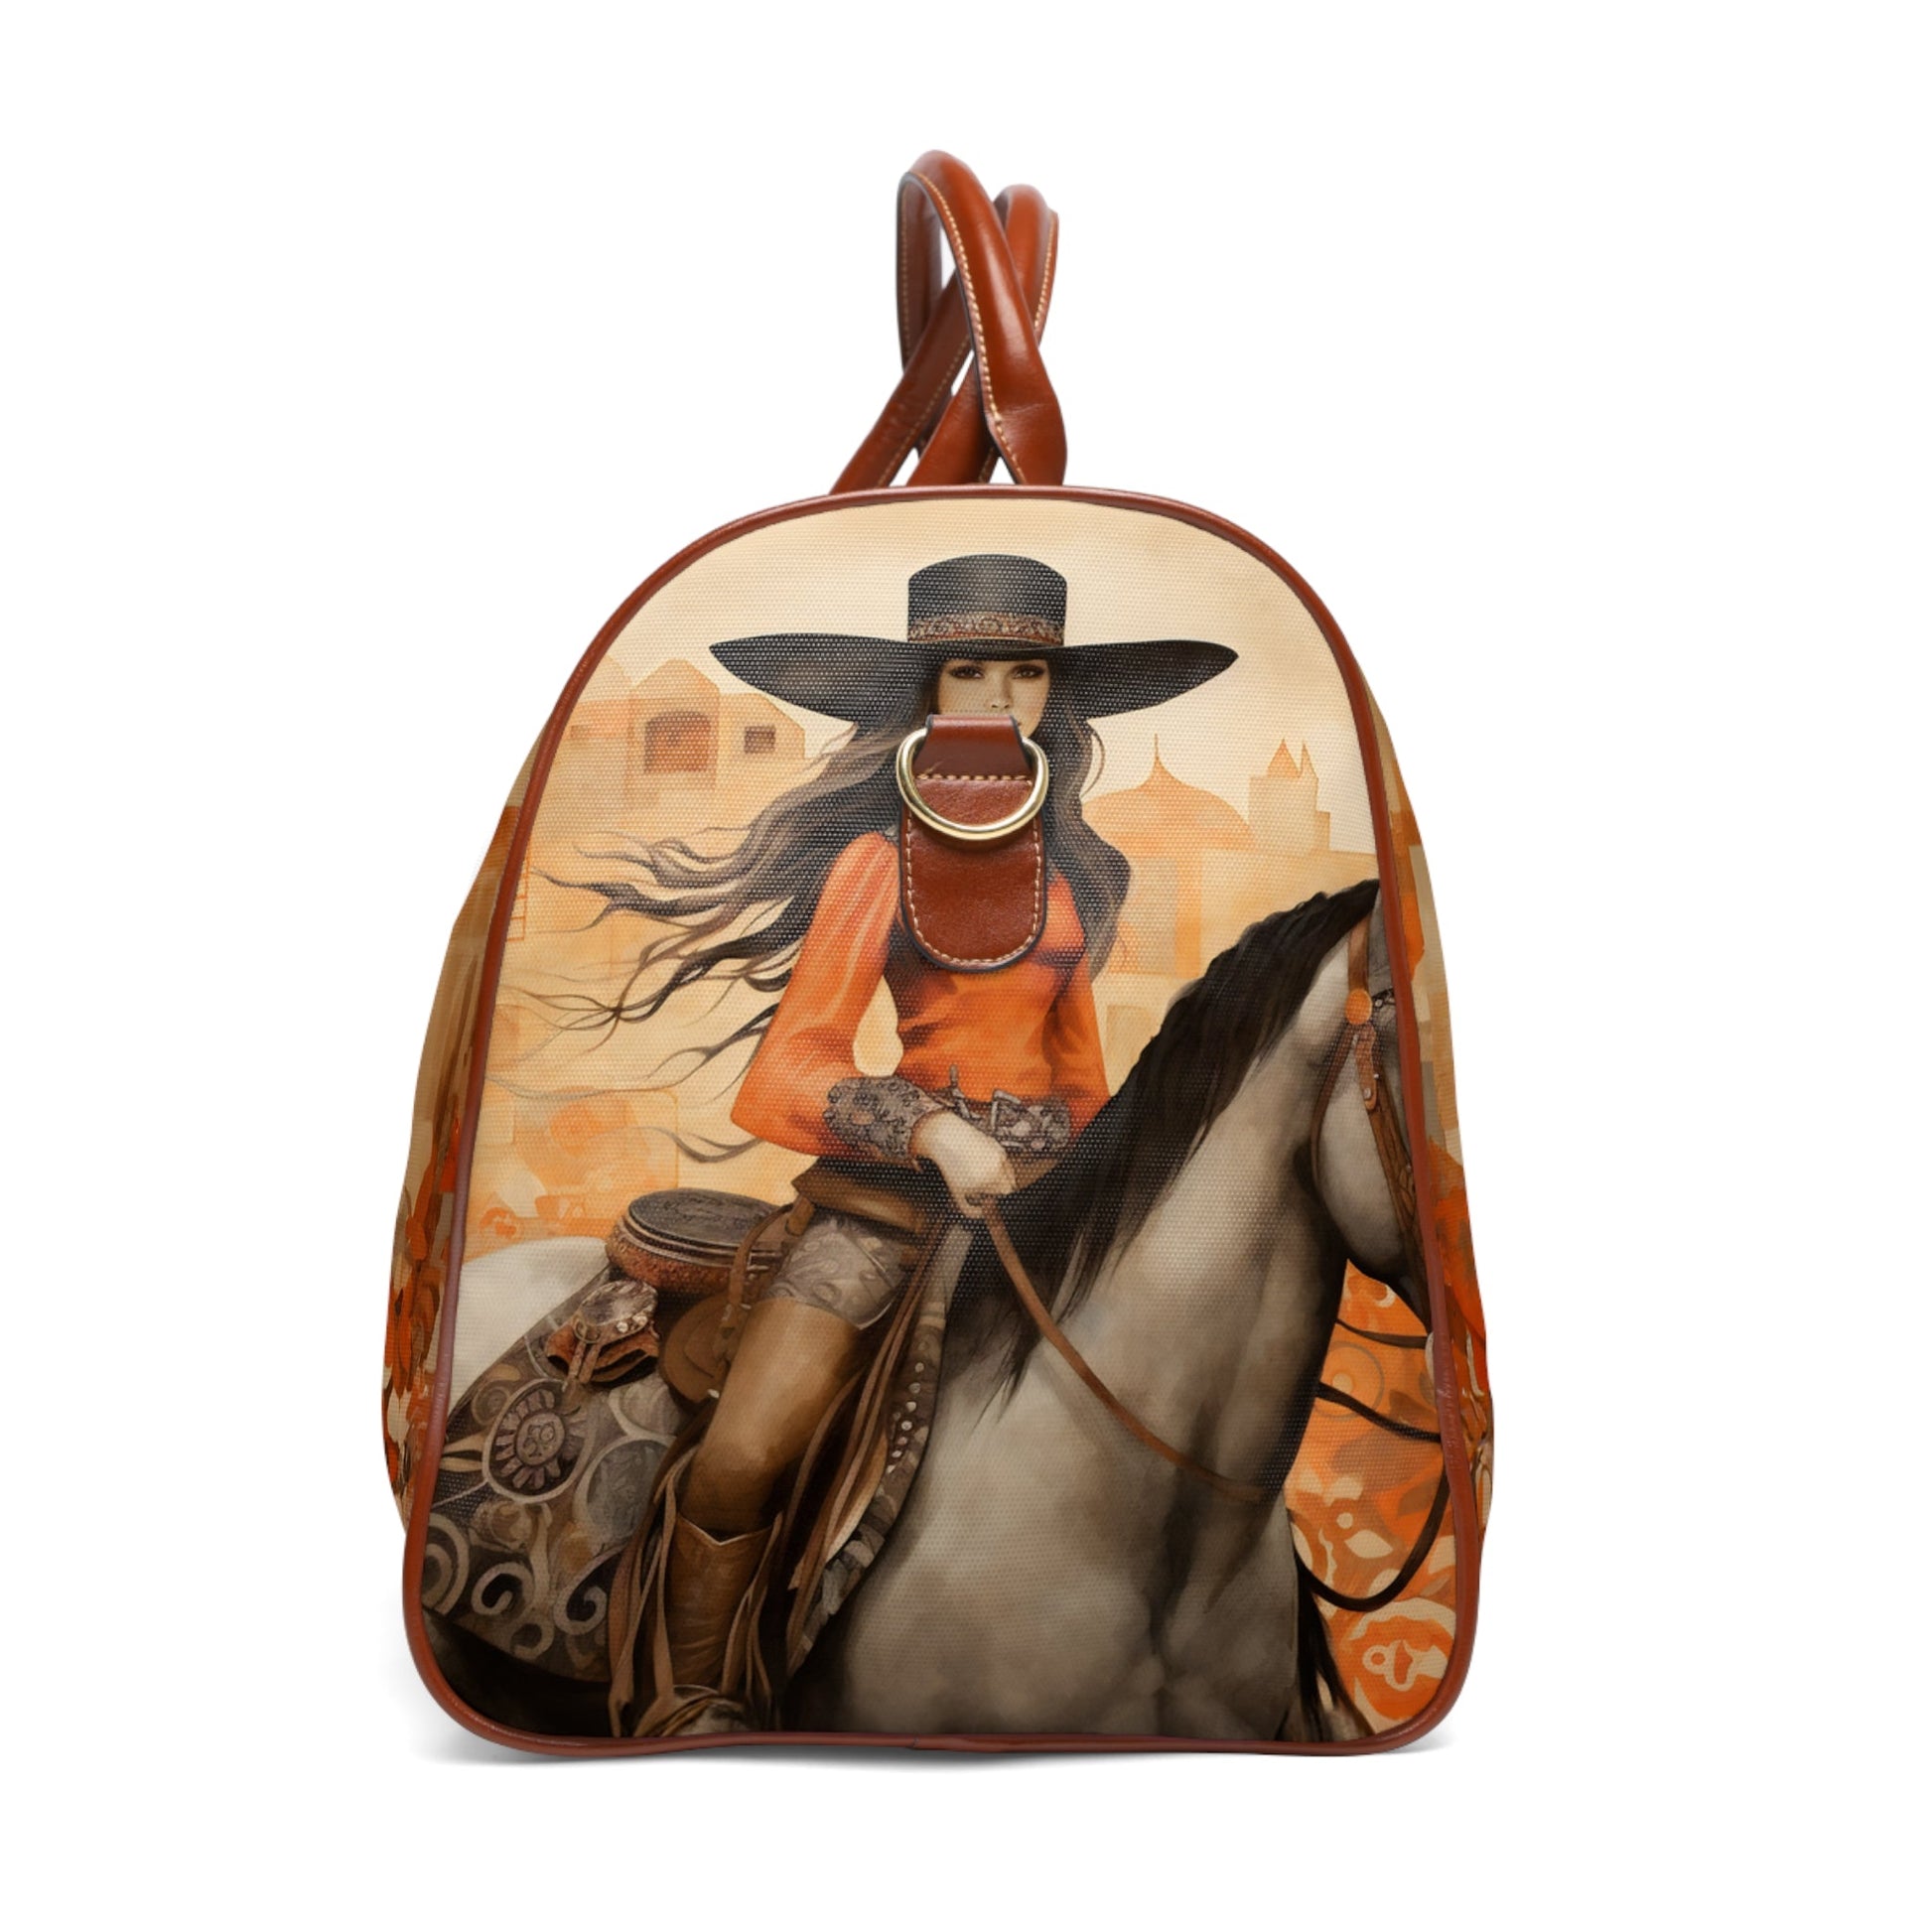 Vaquera Art Travel Bag - Bigger than most duffle bags, tote bags and even most weekender bags!